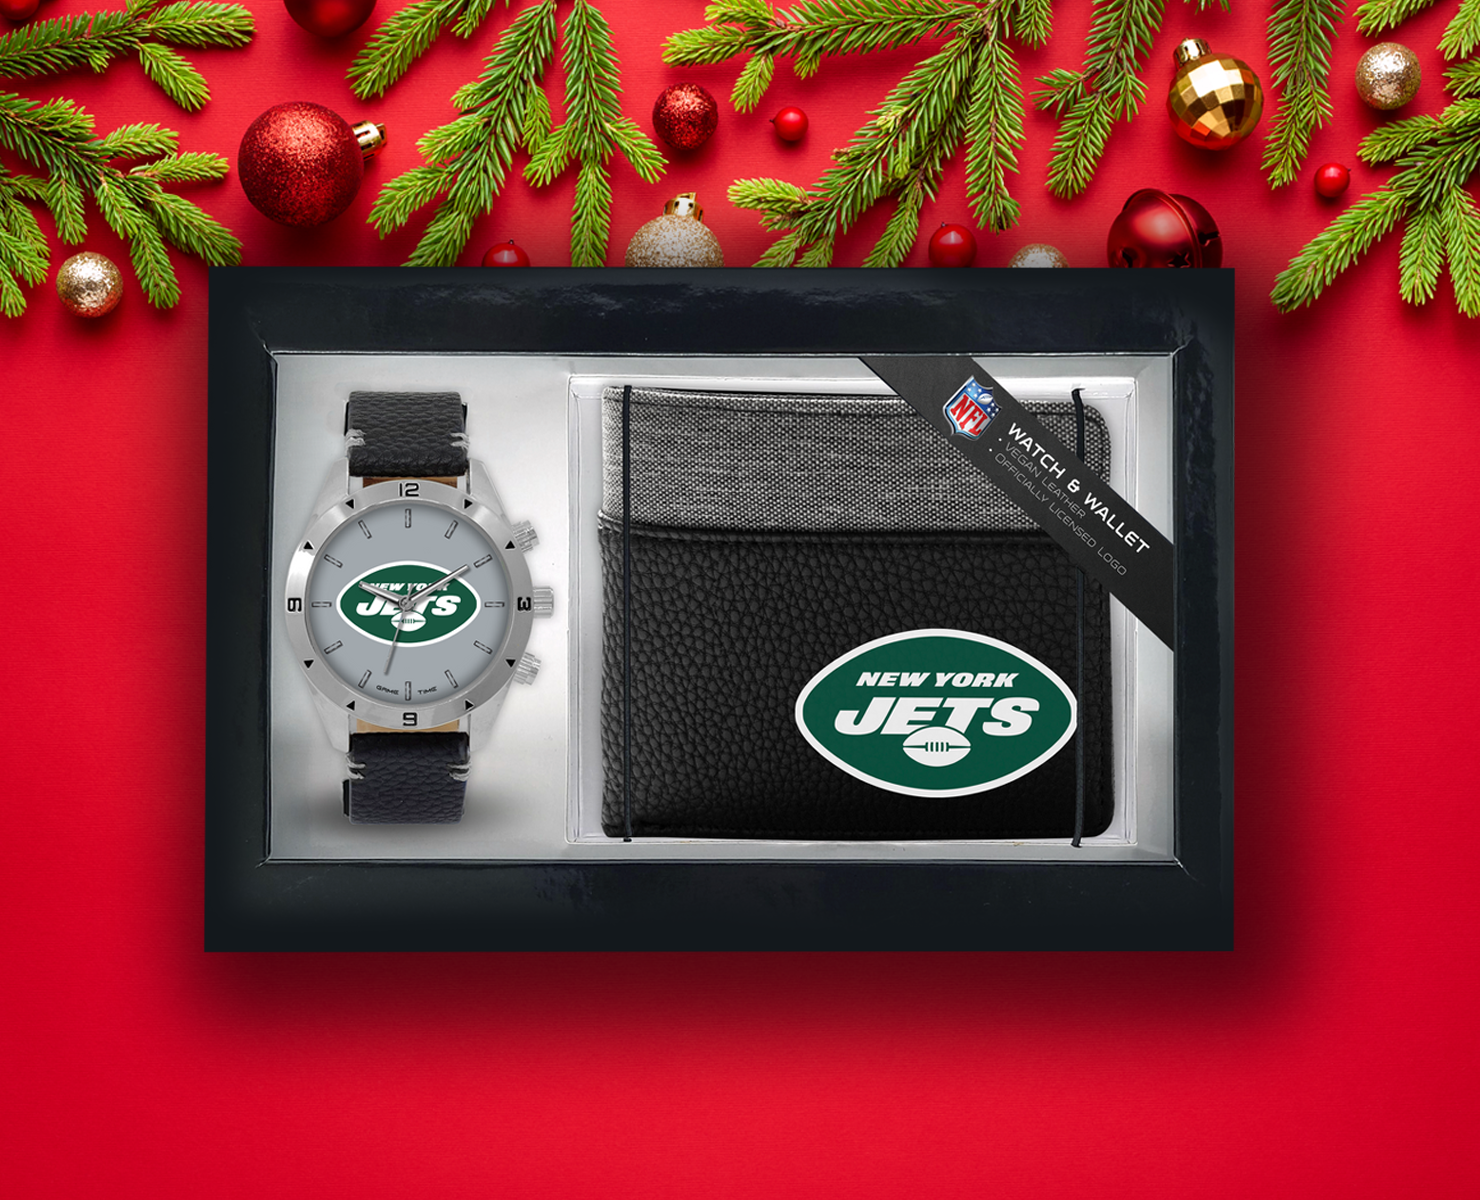 Celebrating the holidays with a New York Jets Wallet and Watch Combo Gift Set